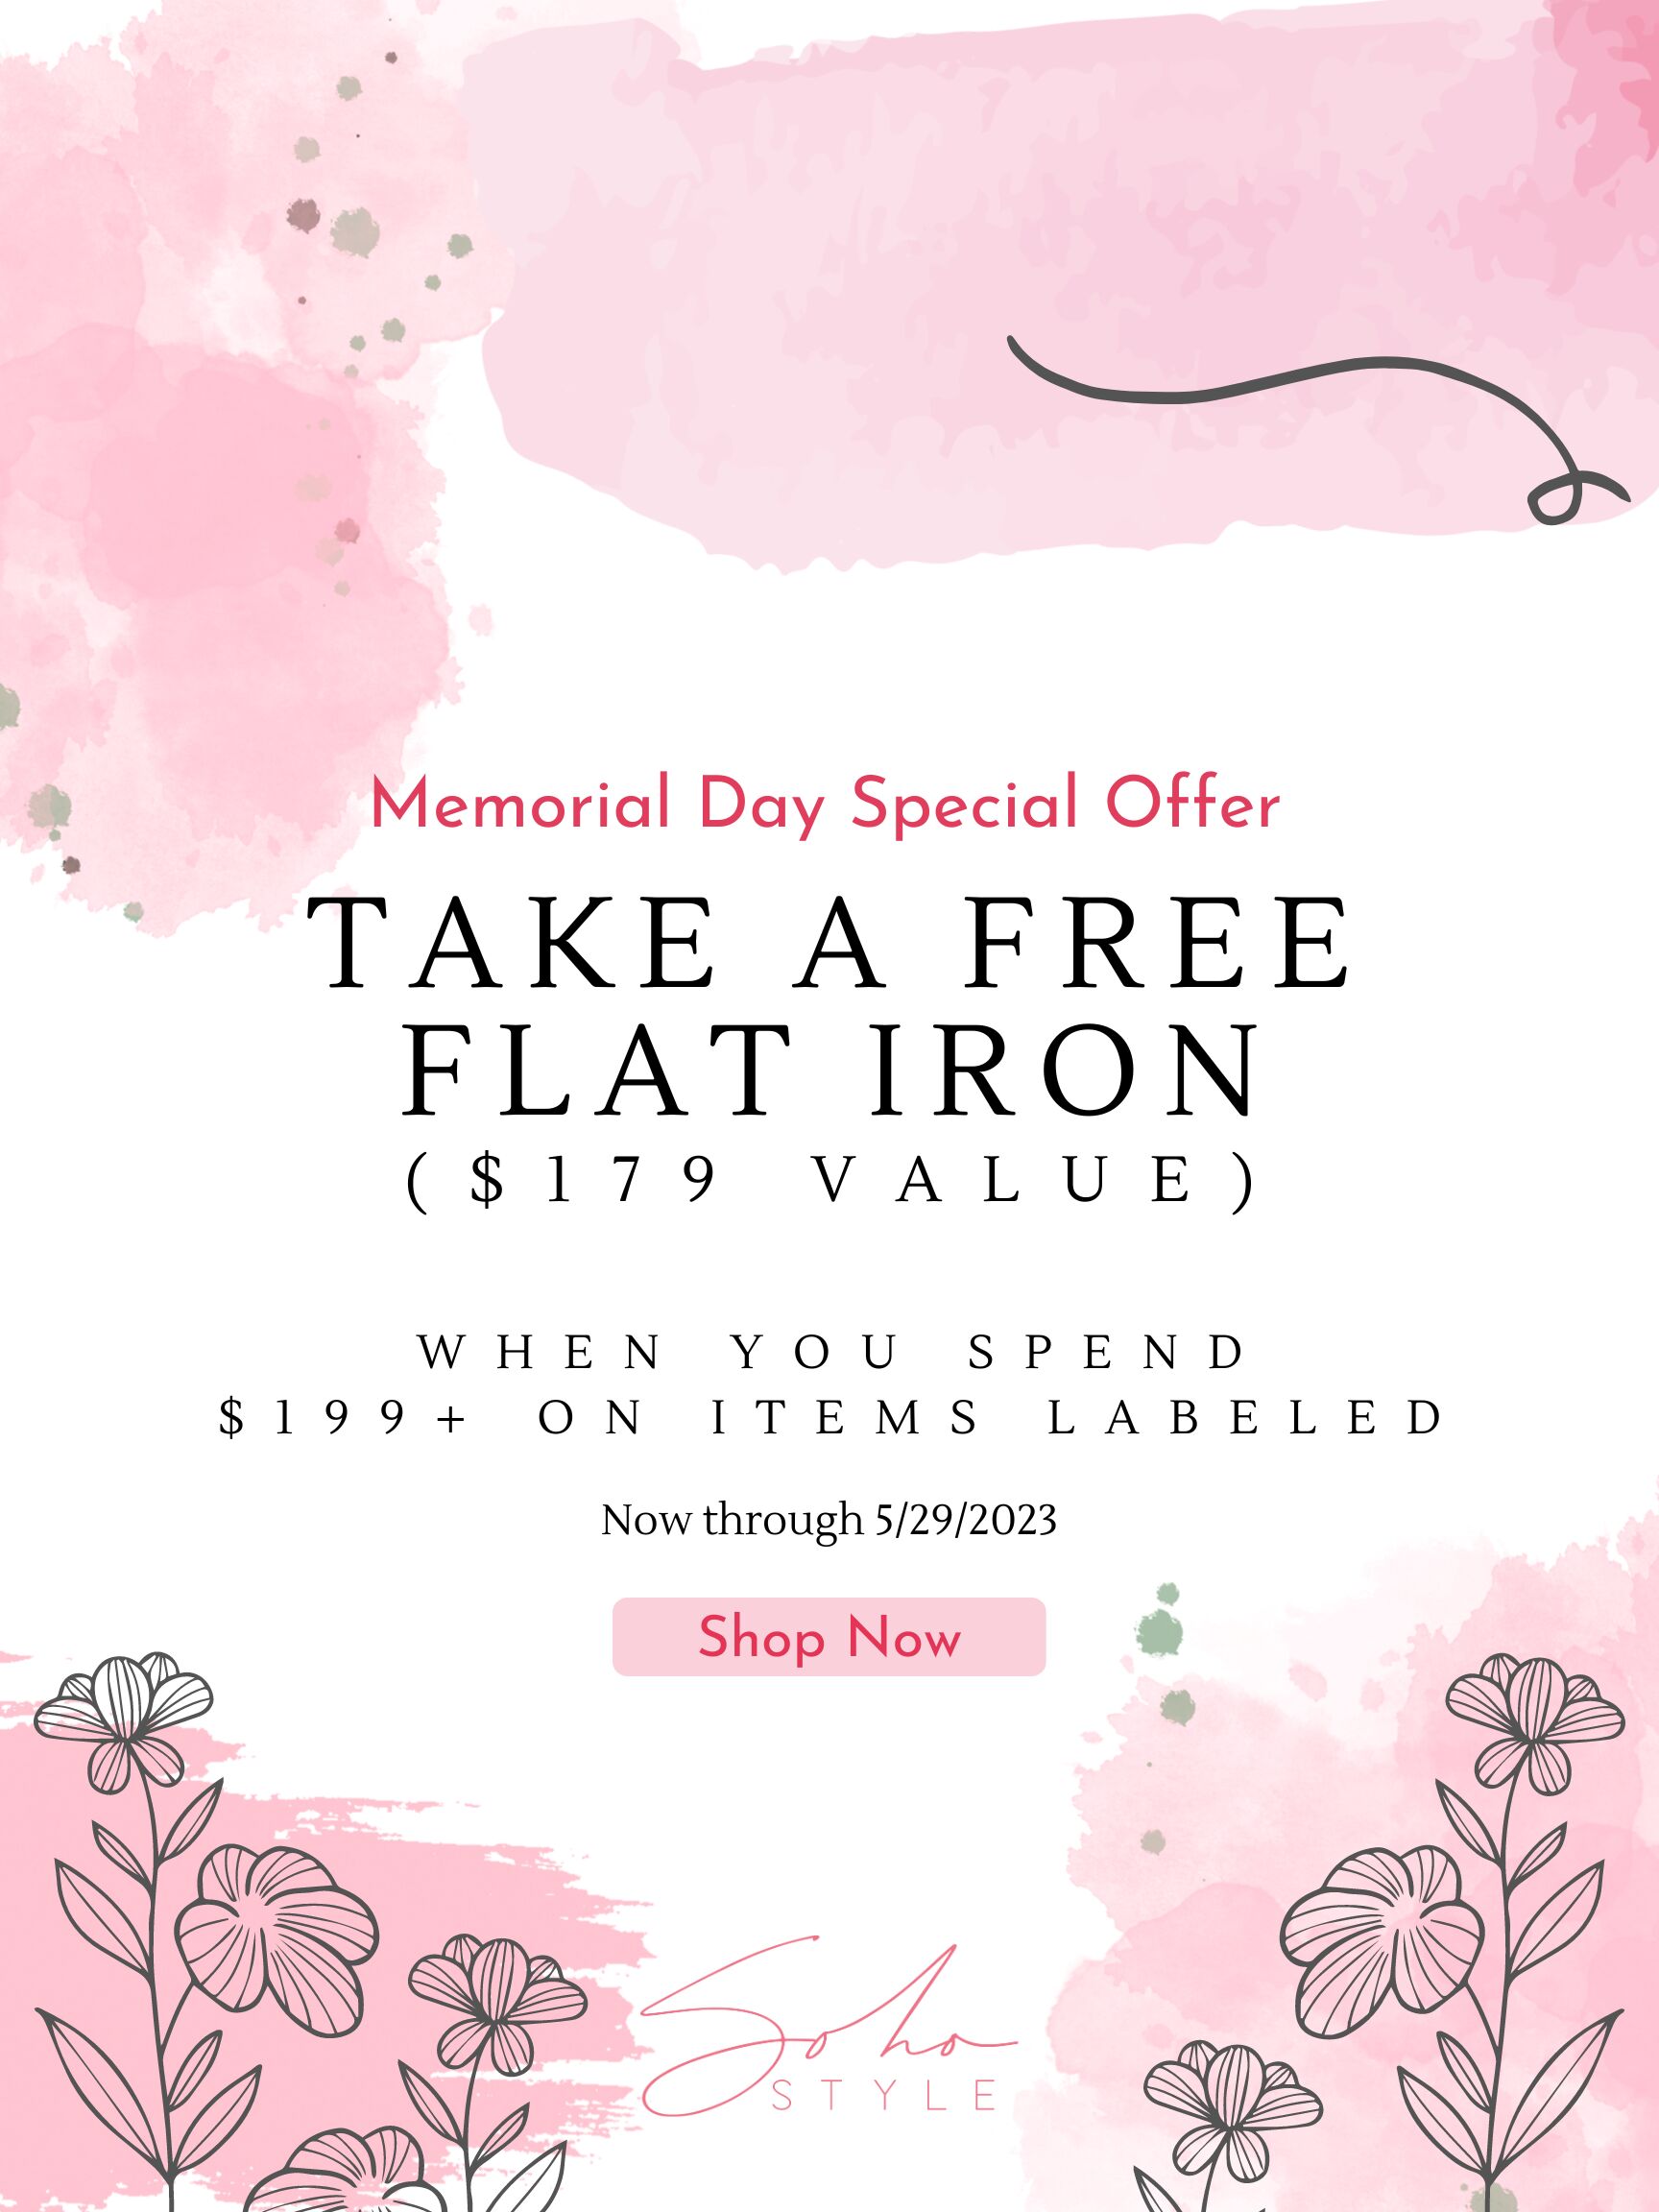 Memorial Day Flat iron free event